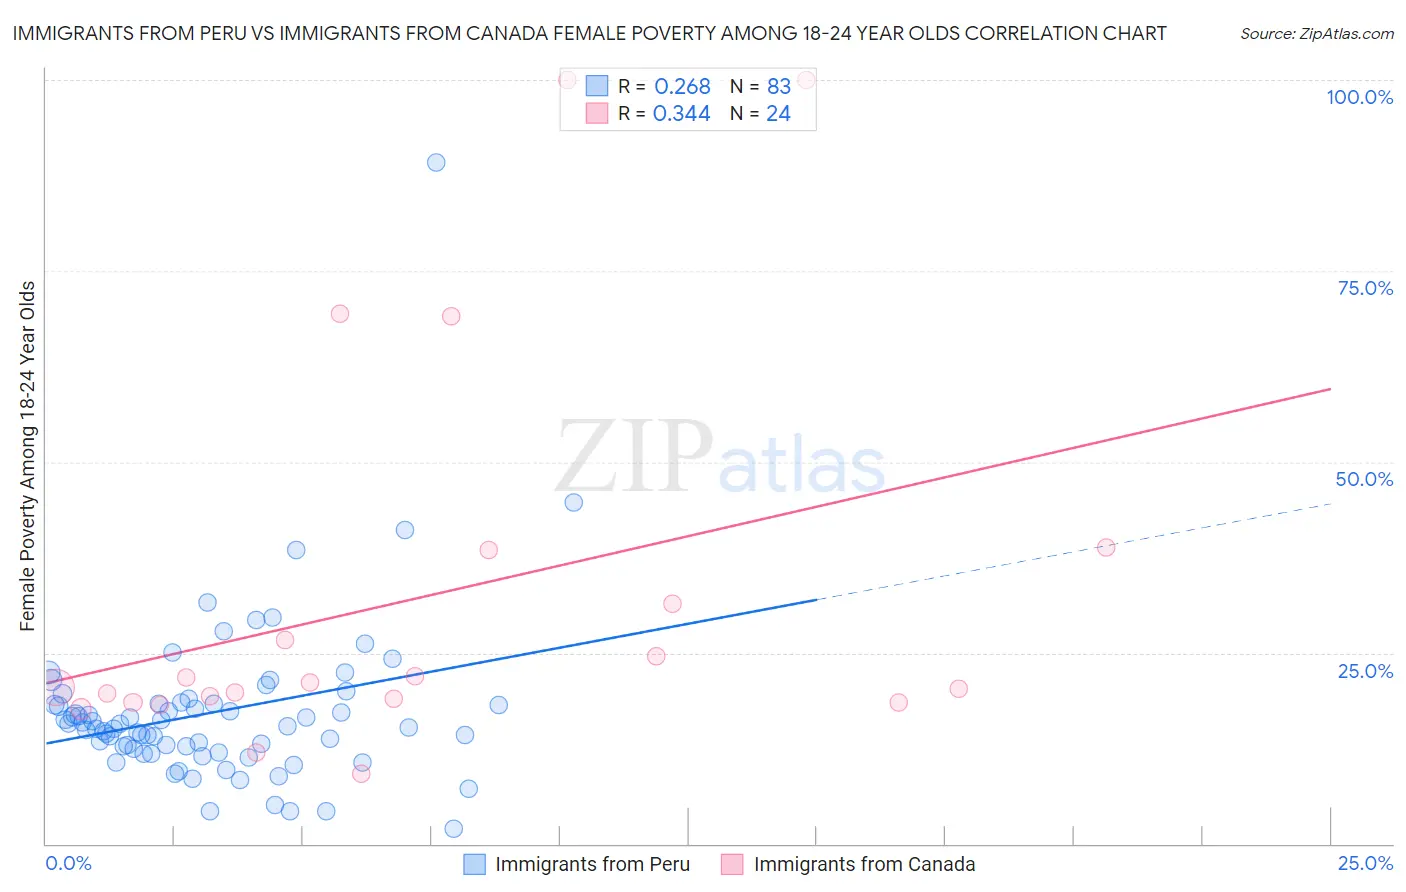 Immigrants from Peru vs Immigrants from Canada Female Poverty Among 18-24 Year Olds